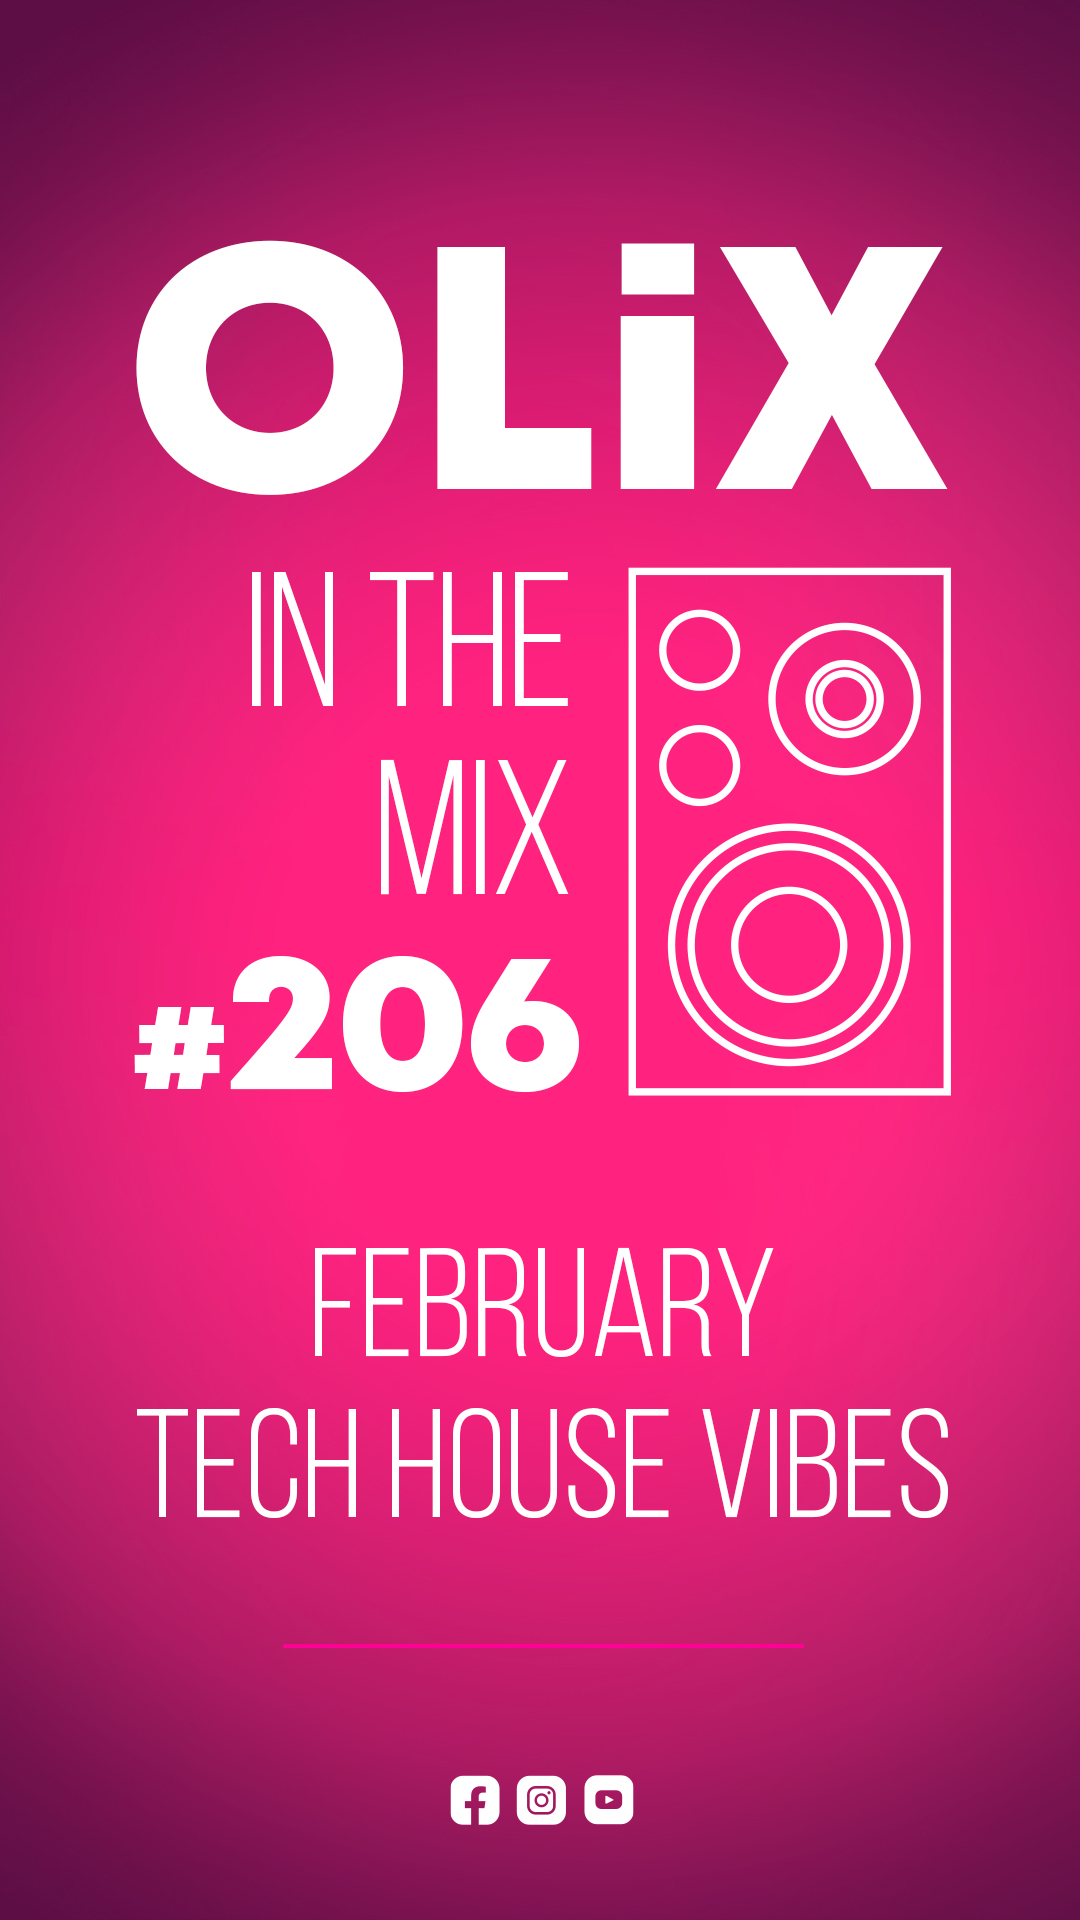 OLiX in the Mix - 206 - February Tech House Vibes